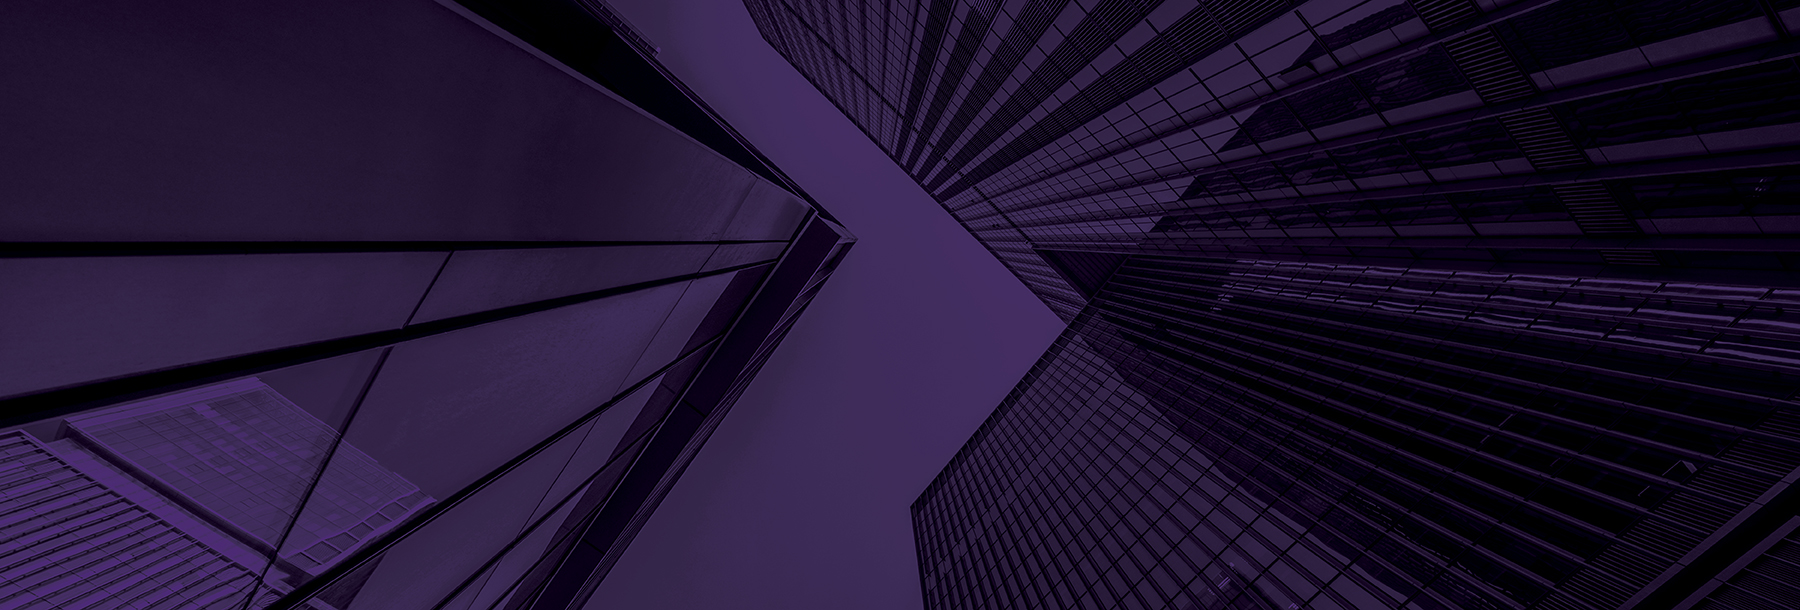 Section Image: Buildings in purple 